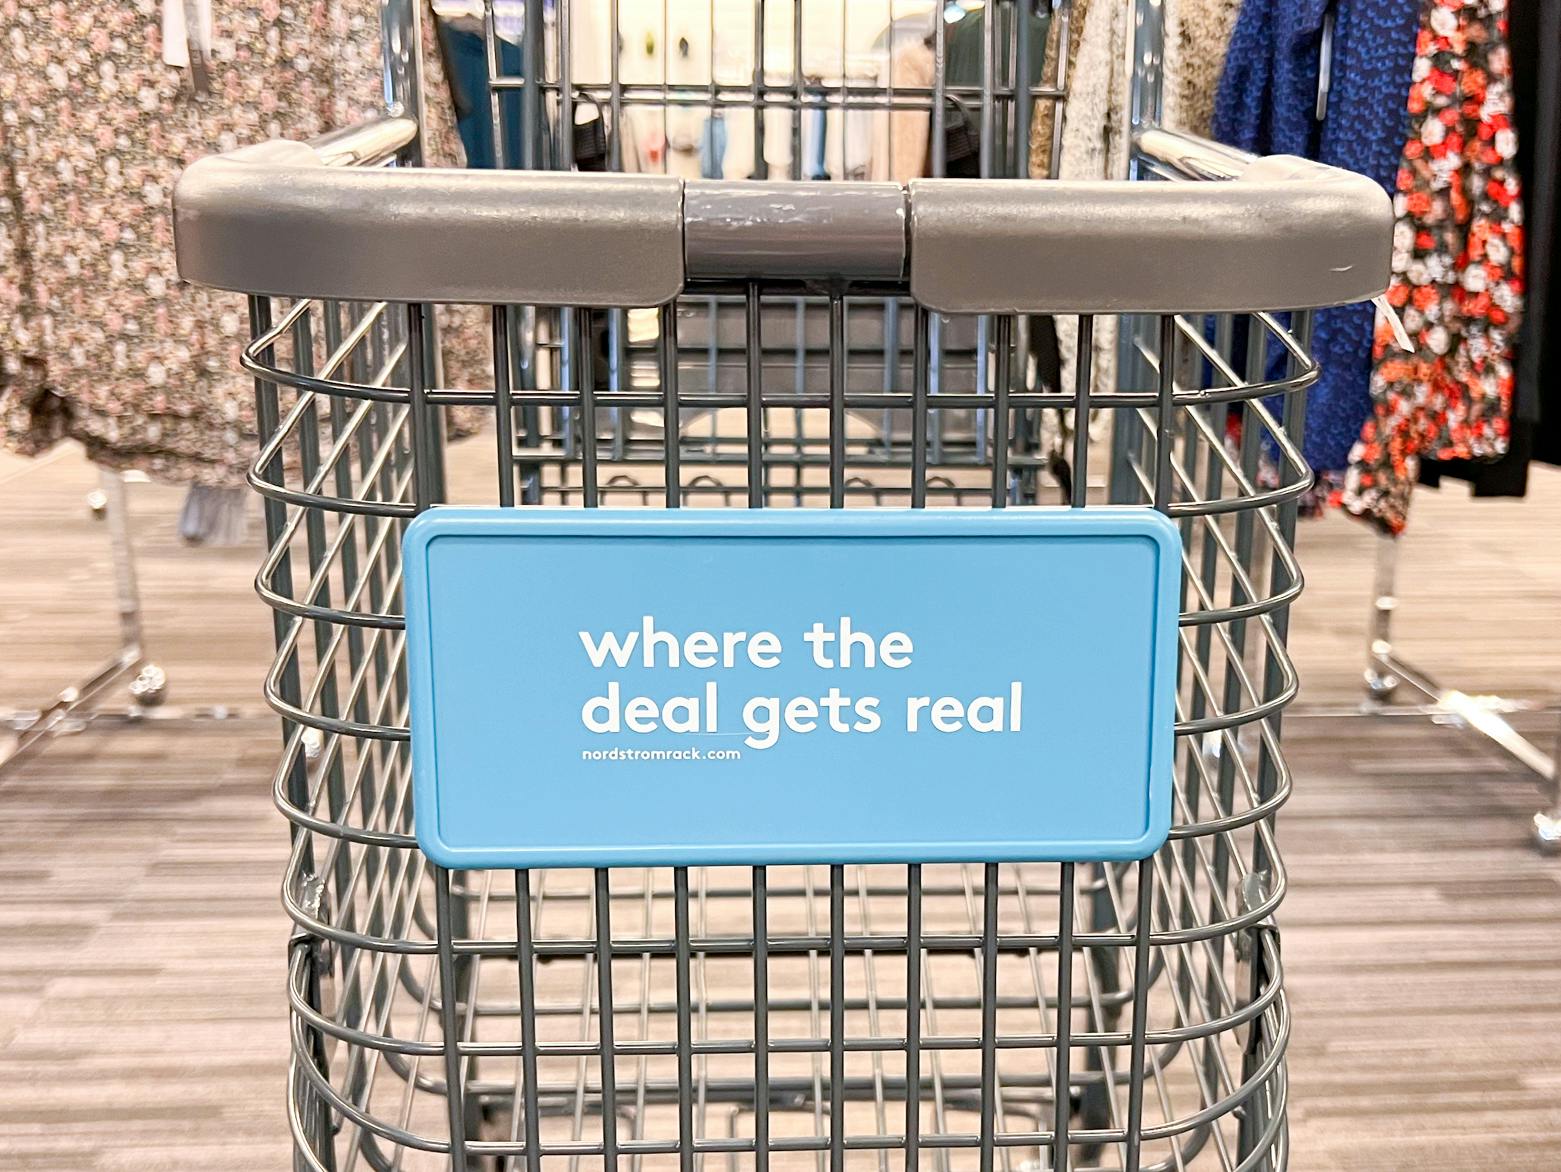 A Nordstrom Rack shopping cart in an aisle